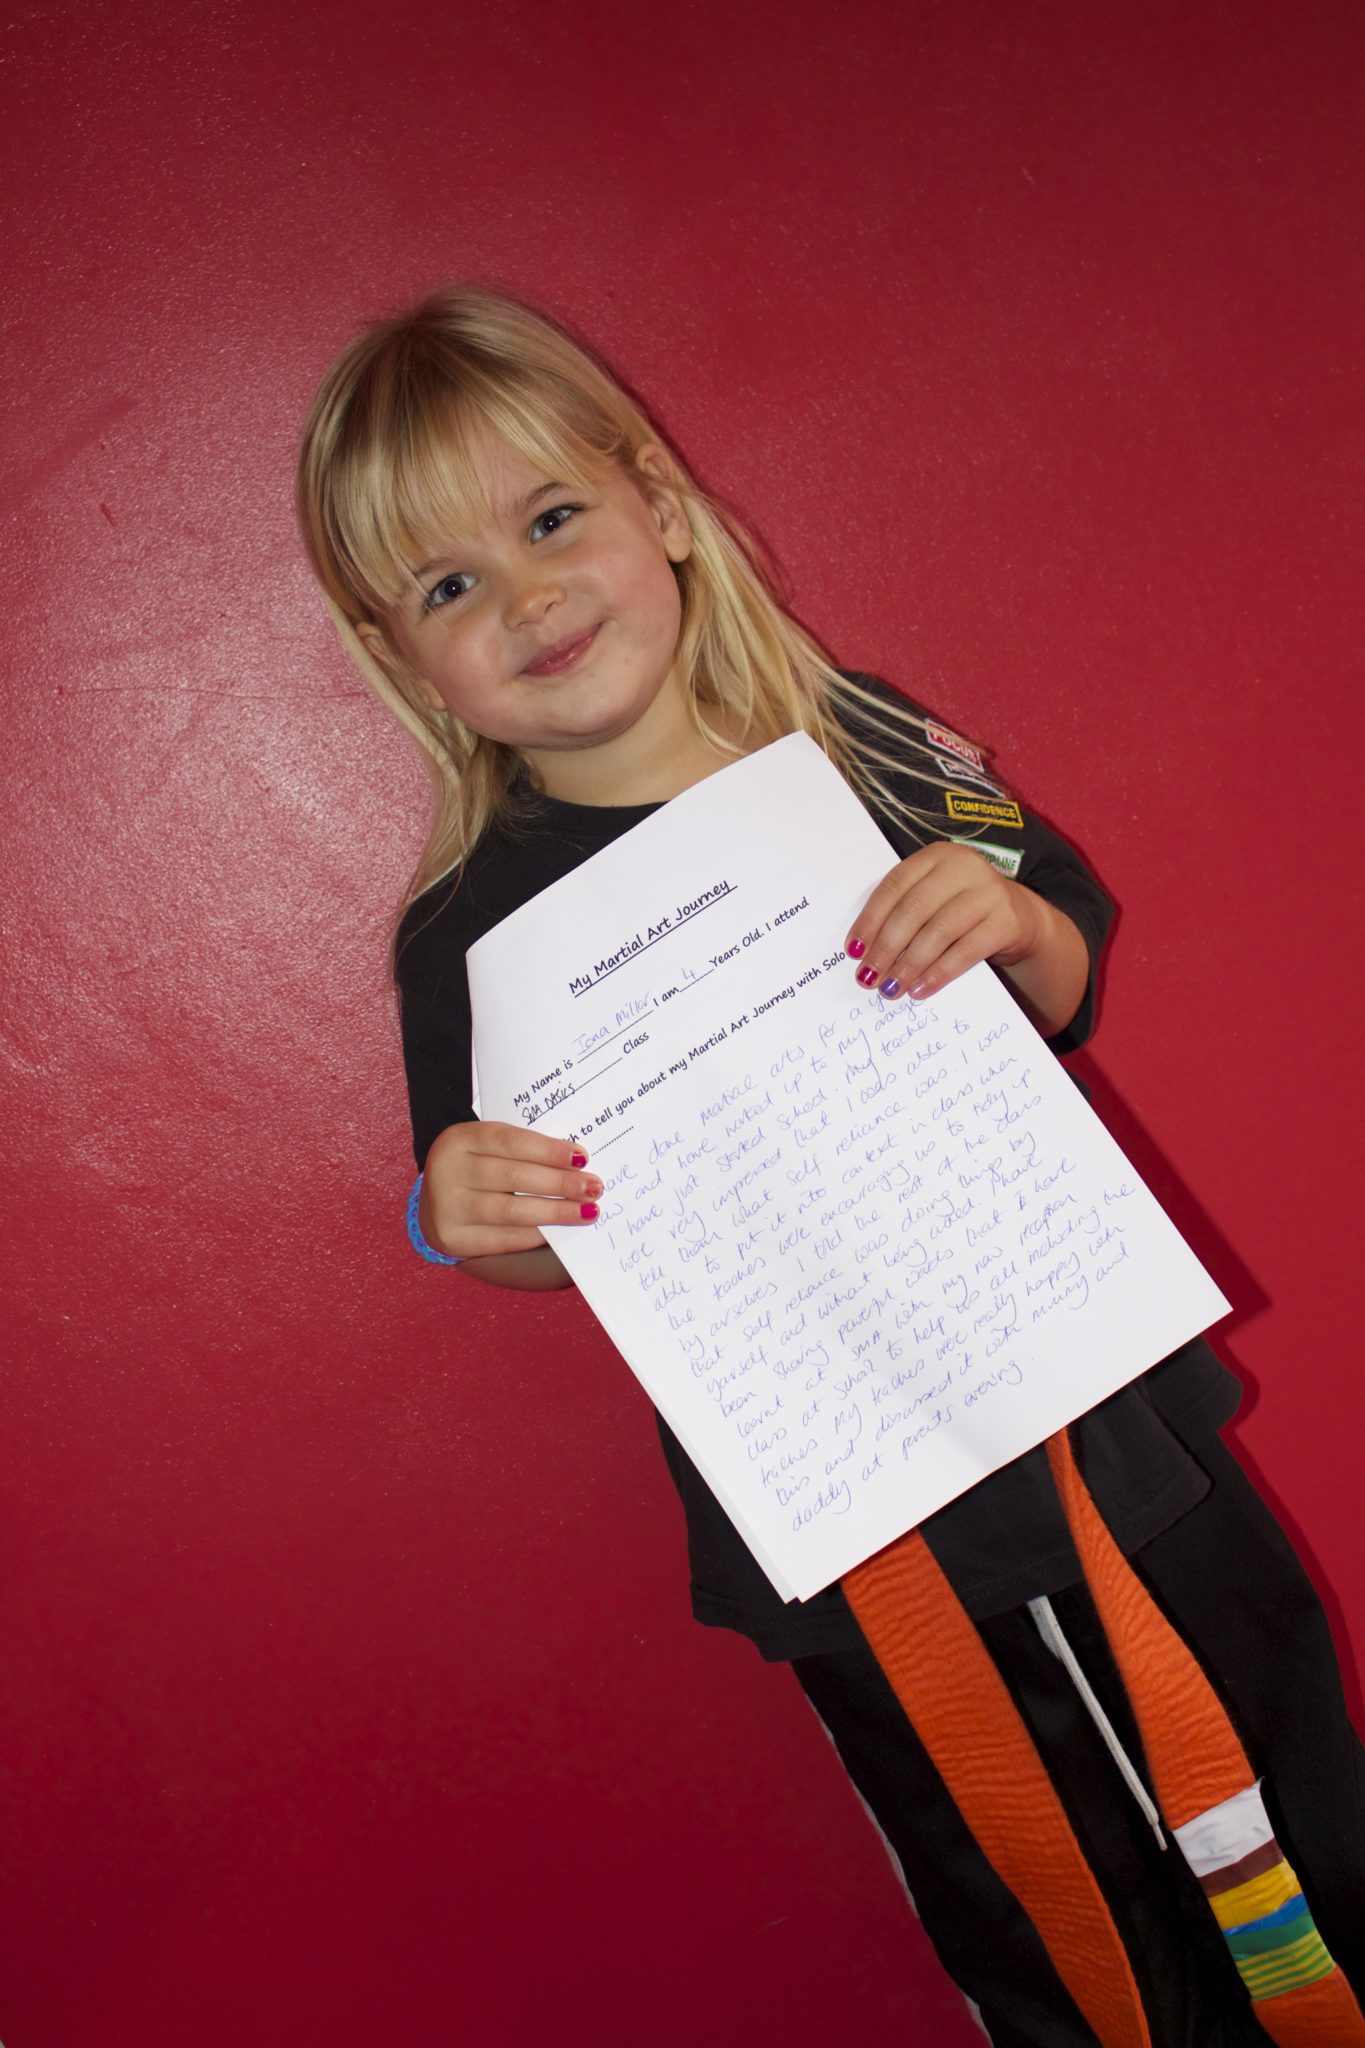 My Martial Arts journey by Iona